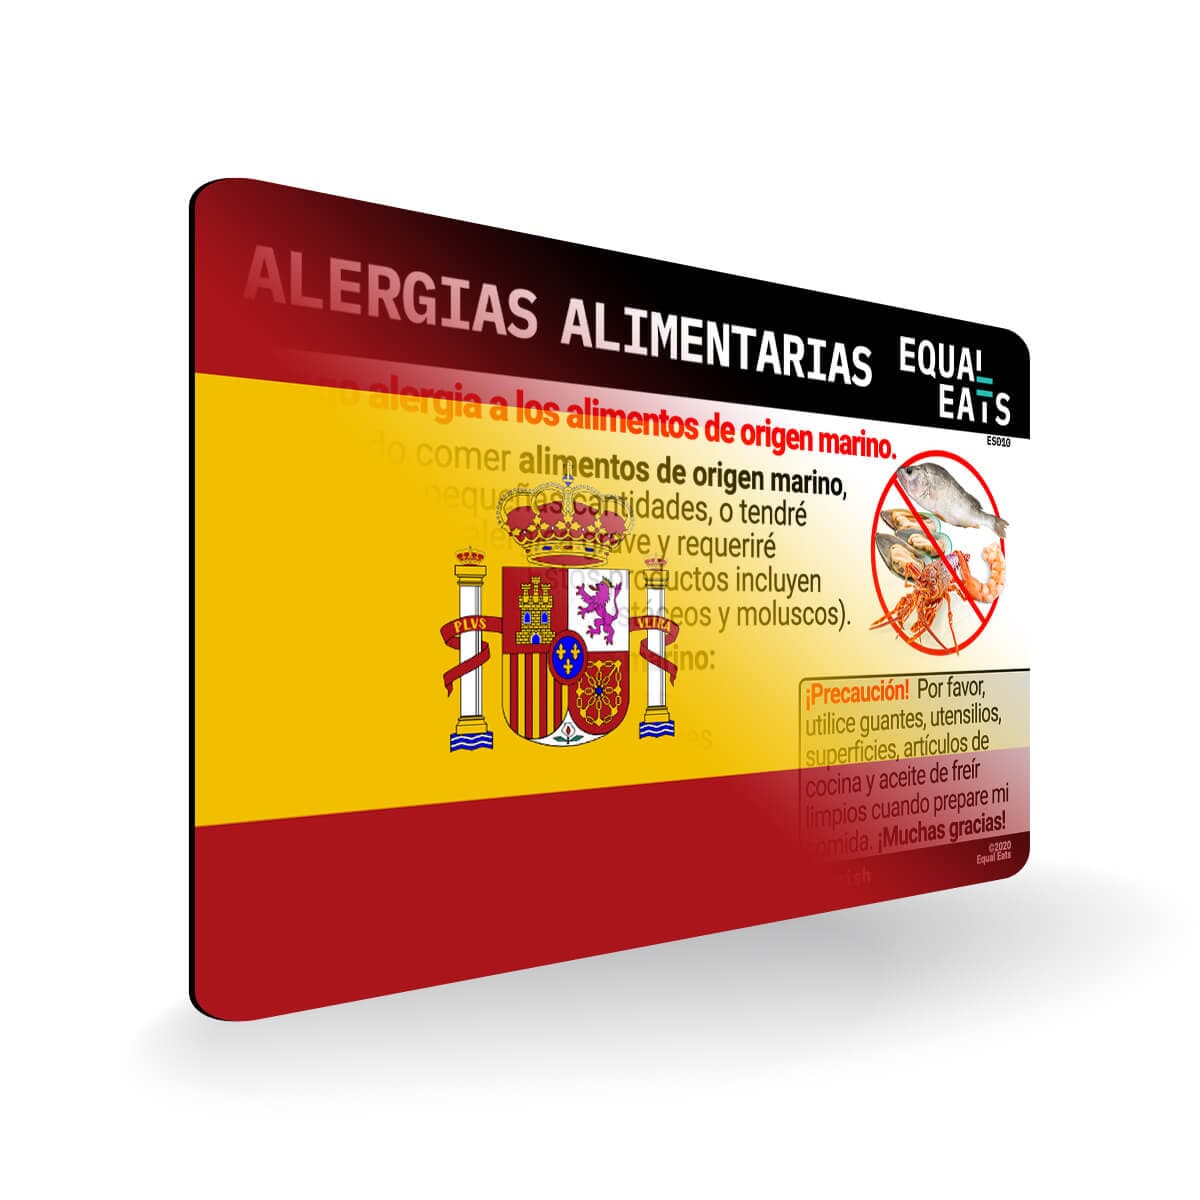 Seafood Allergy in Spanish. Seafood Allergy Card for Spain